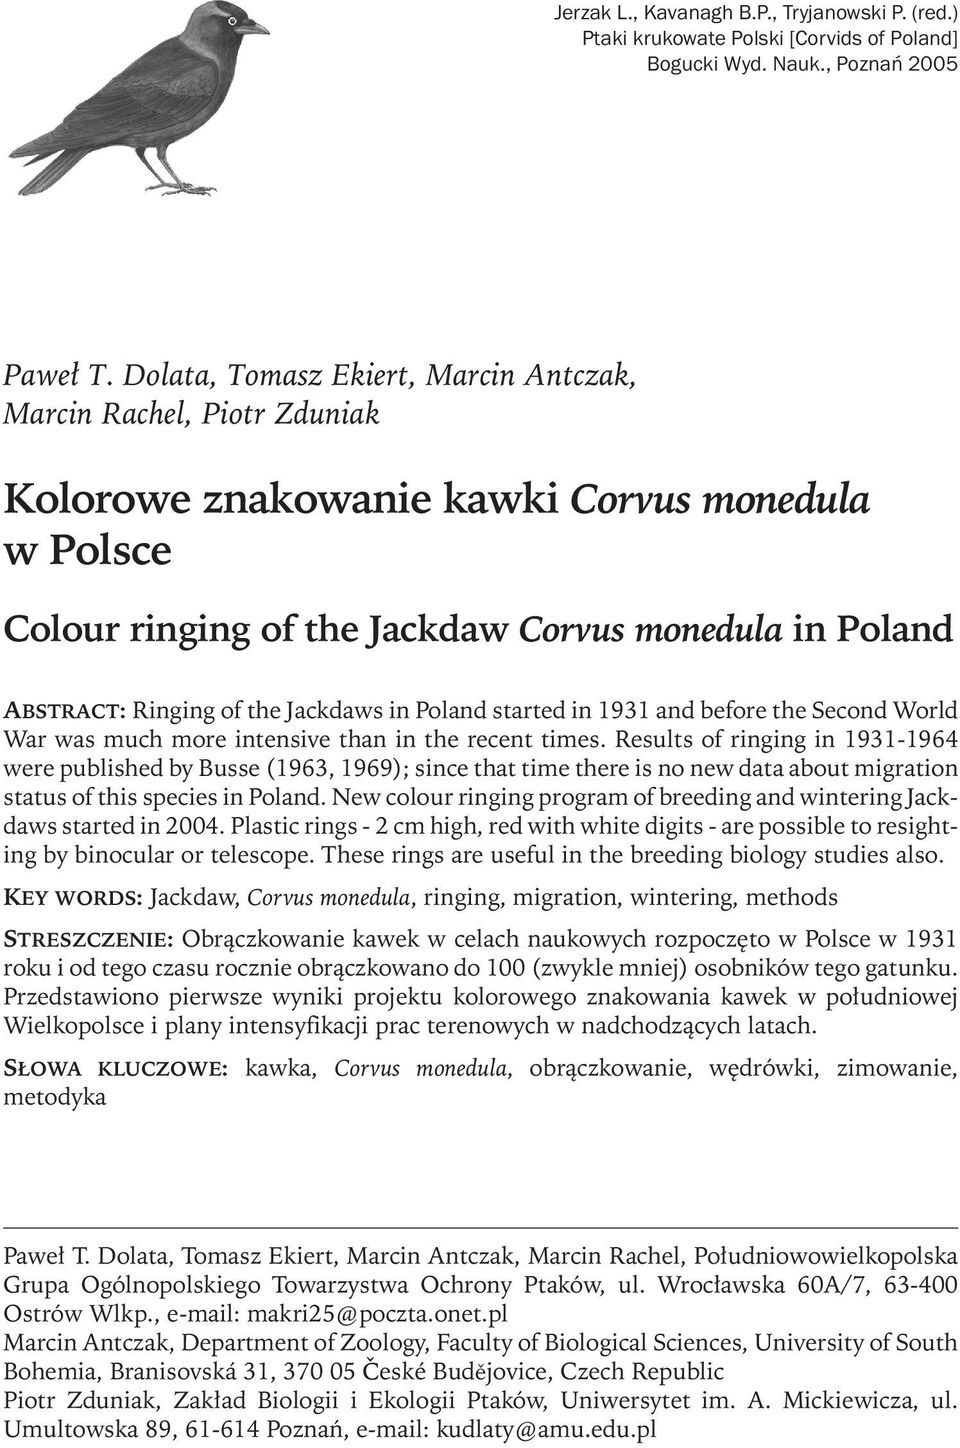 Jackdaws in Poland started in 1931 and before the Second World War was much more intensive than in the recent times.